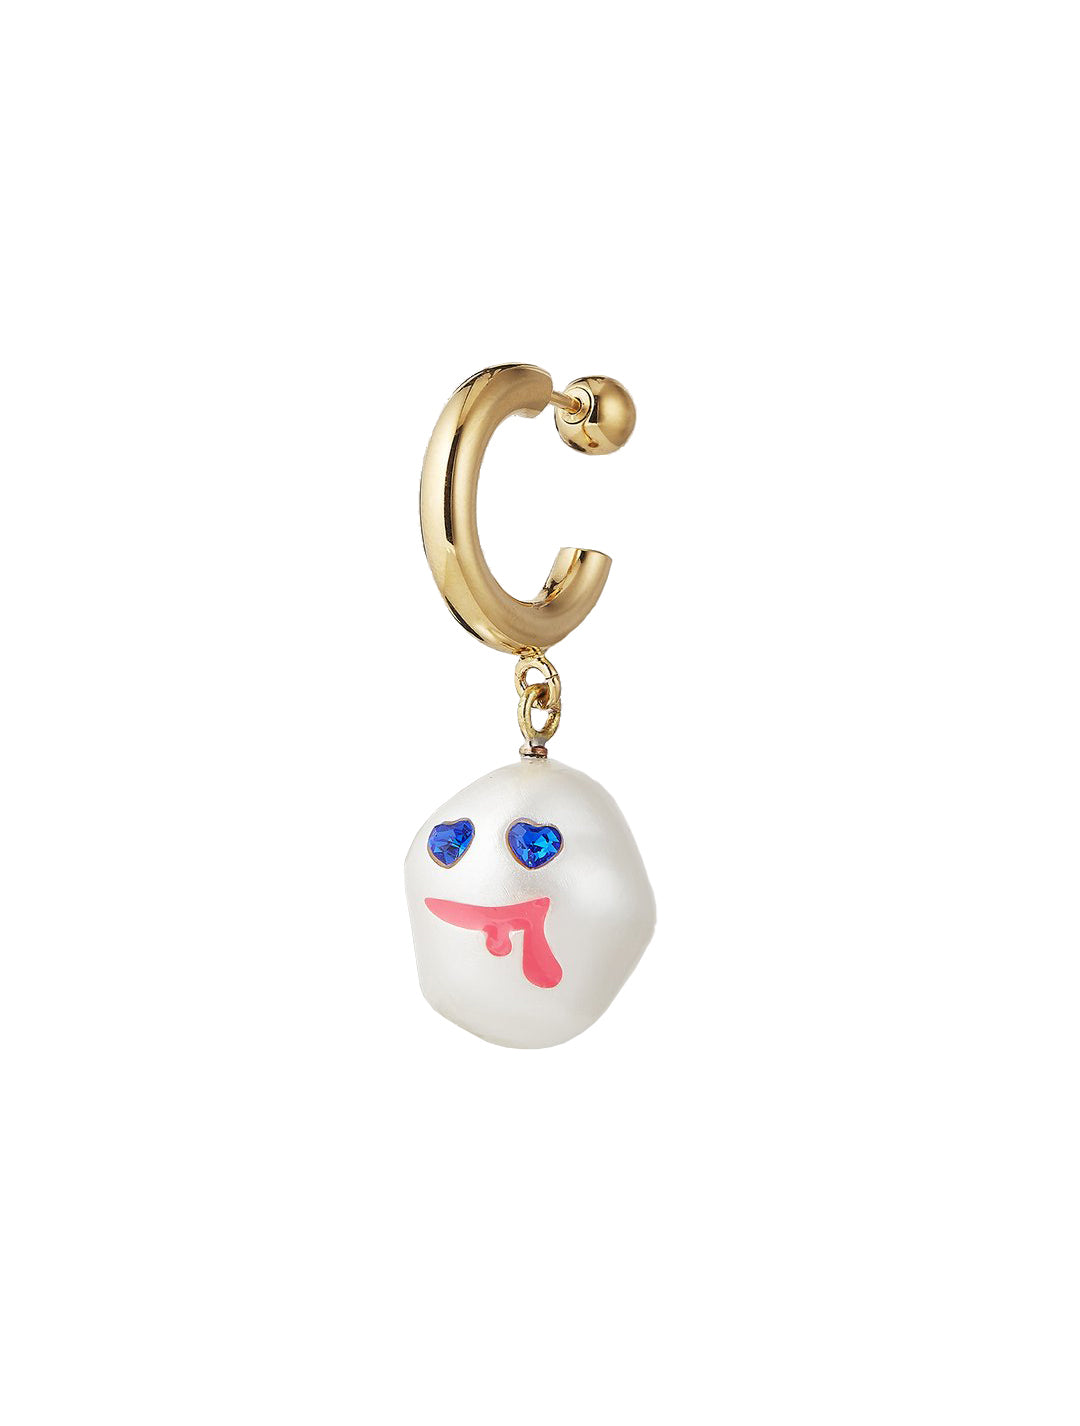 Saf Safu Drooling Cotton Candy Earring